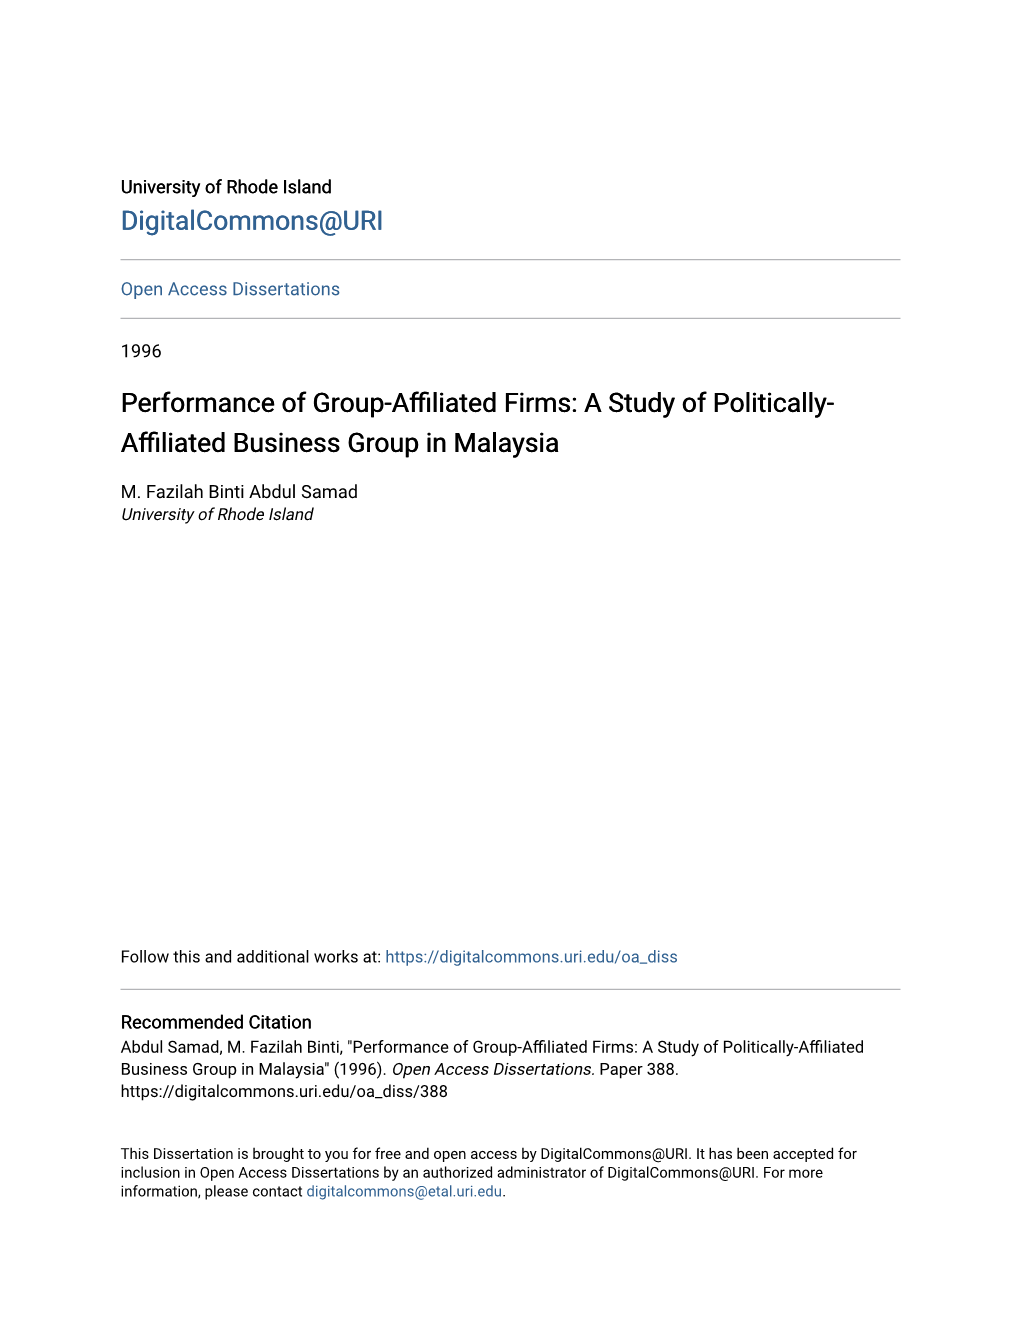 A Study of Politically-Affiliated Business Group in Malaysia